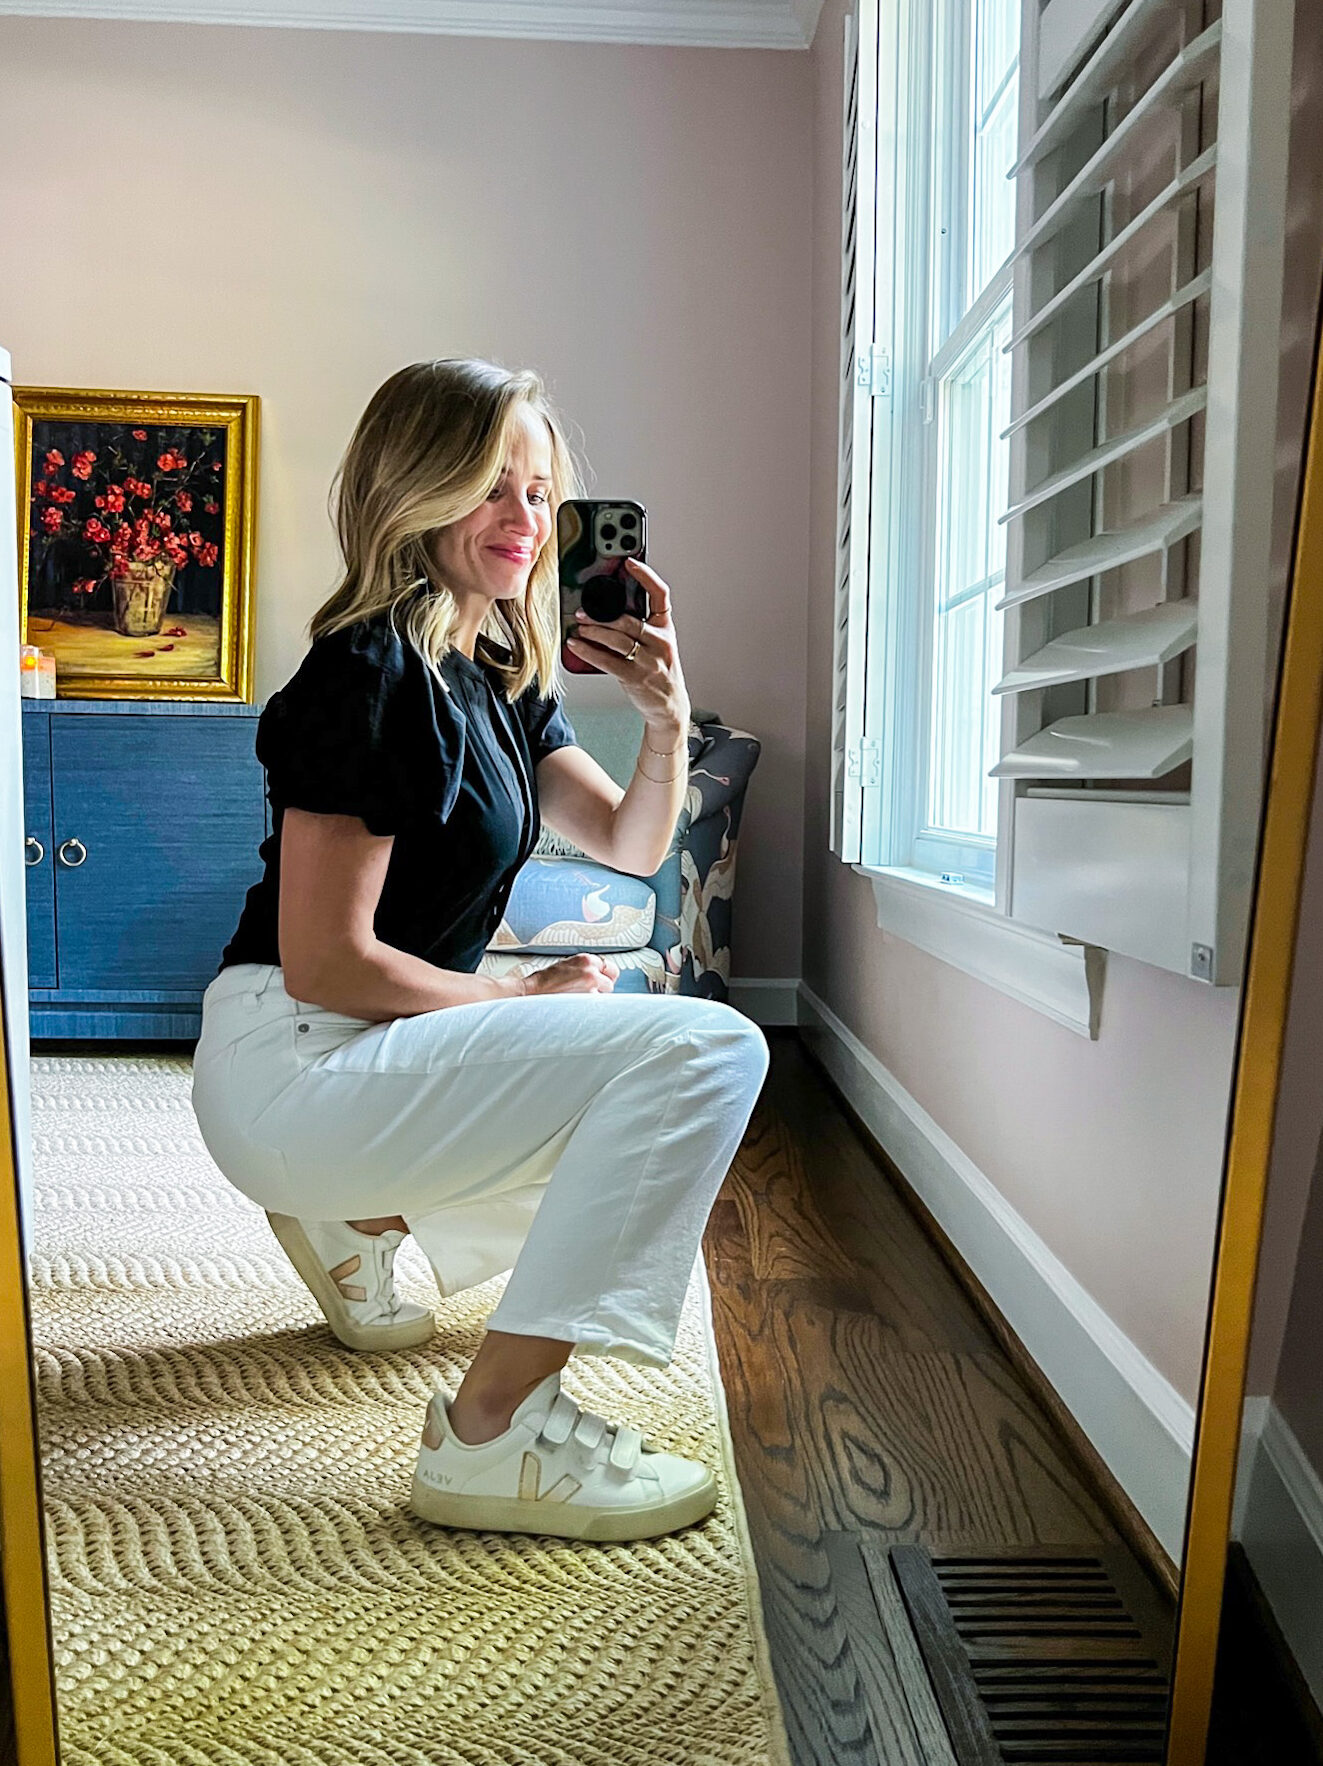 TeriLyn Adams showing details of her Veja sneakers and White Jeans